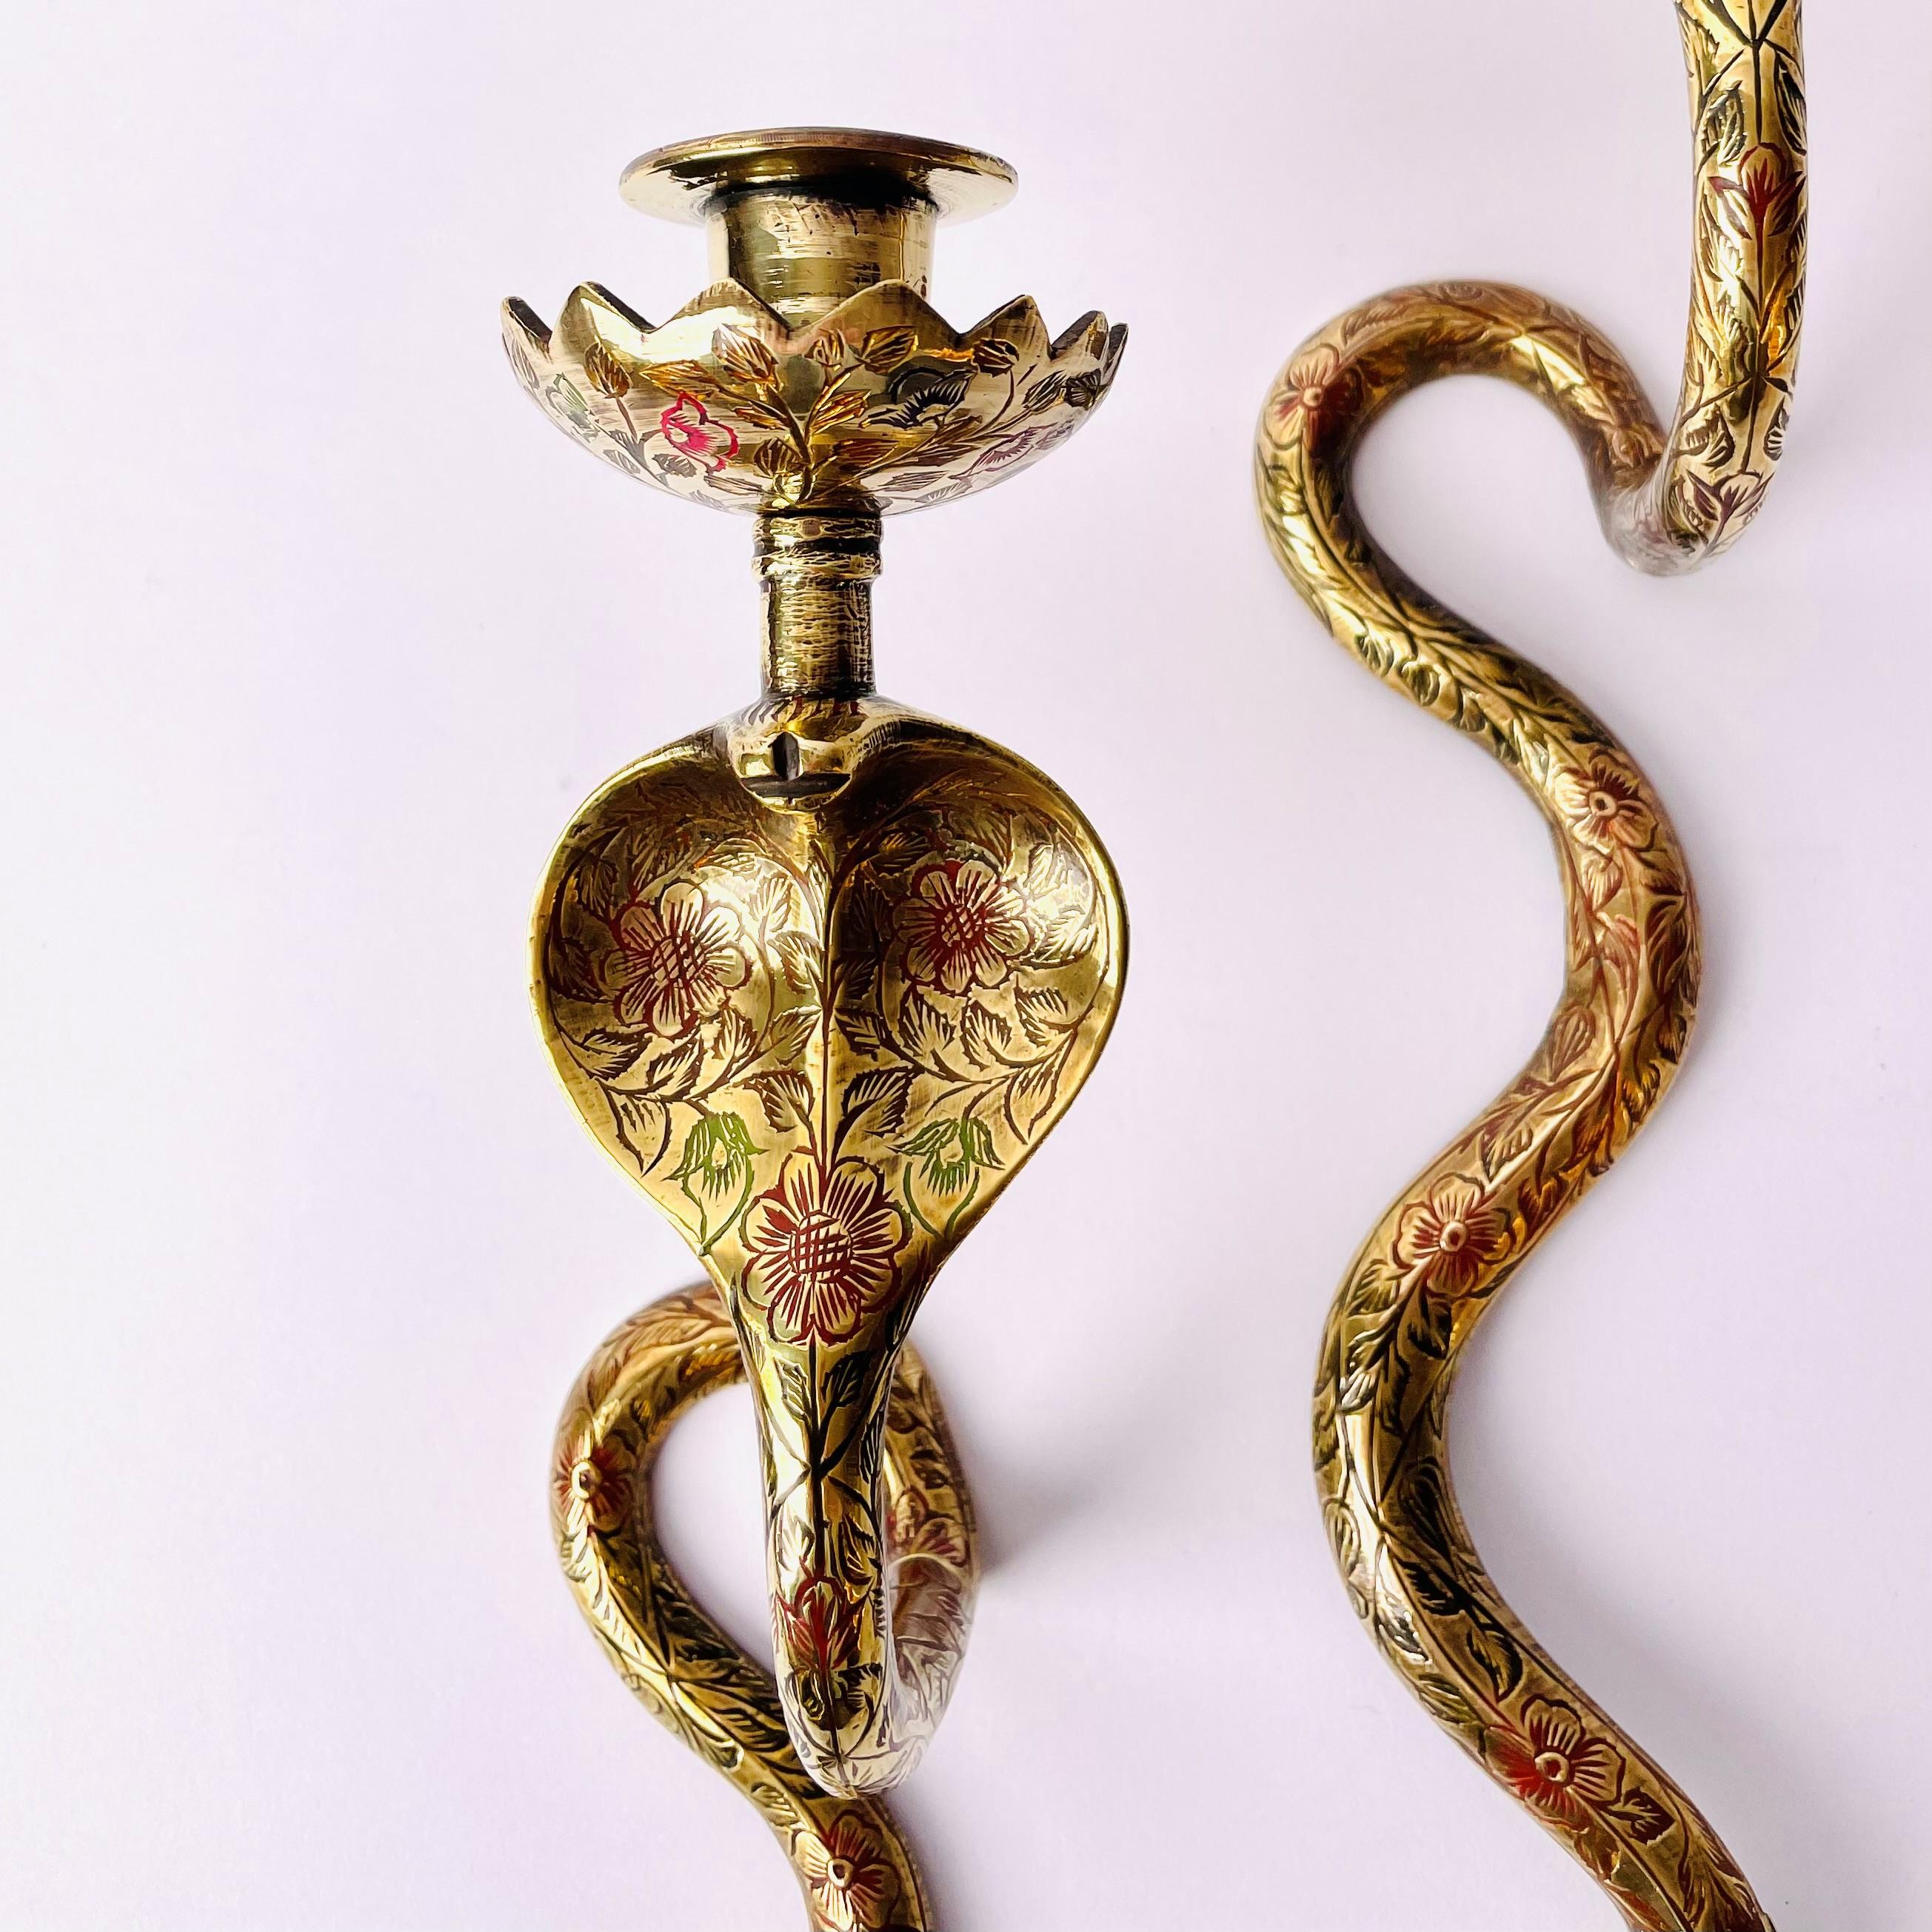 Early 20th Century Pair of Wall Lights  in the Shape of a Cobra, Art Deco, 1920s-1930s